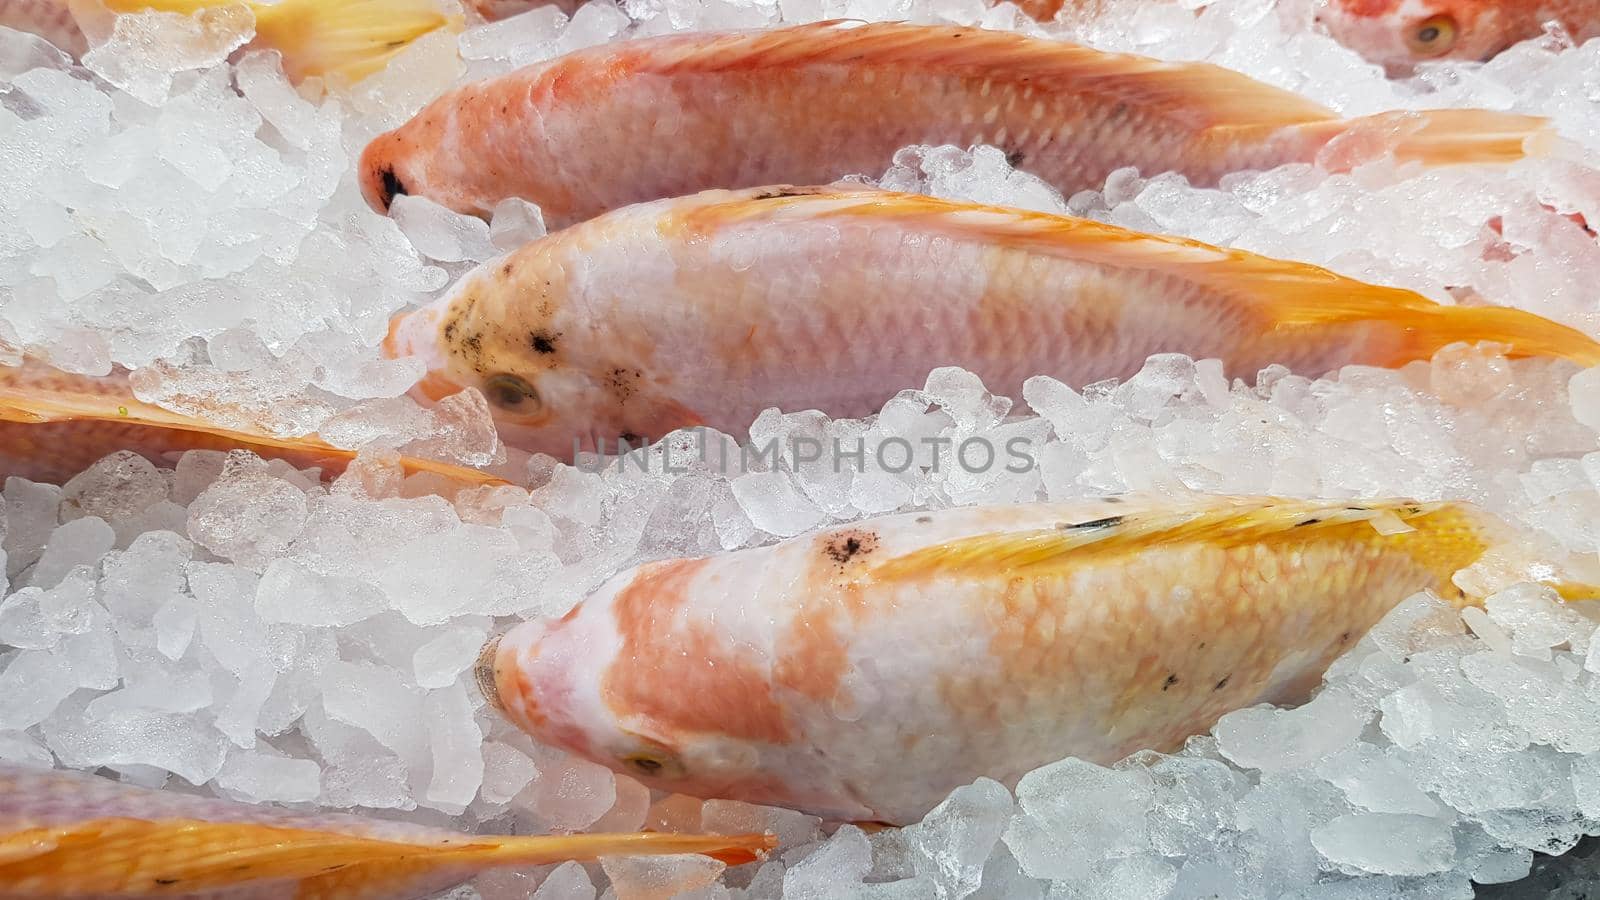 Frozen fish in ice to keep freshness and sell to customers in the shop.